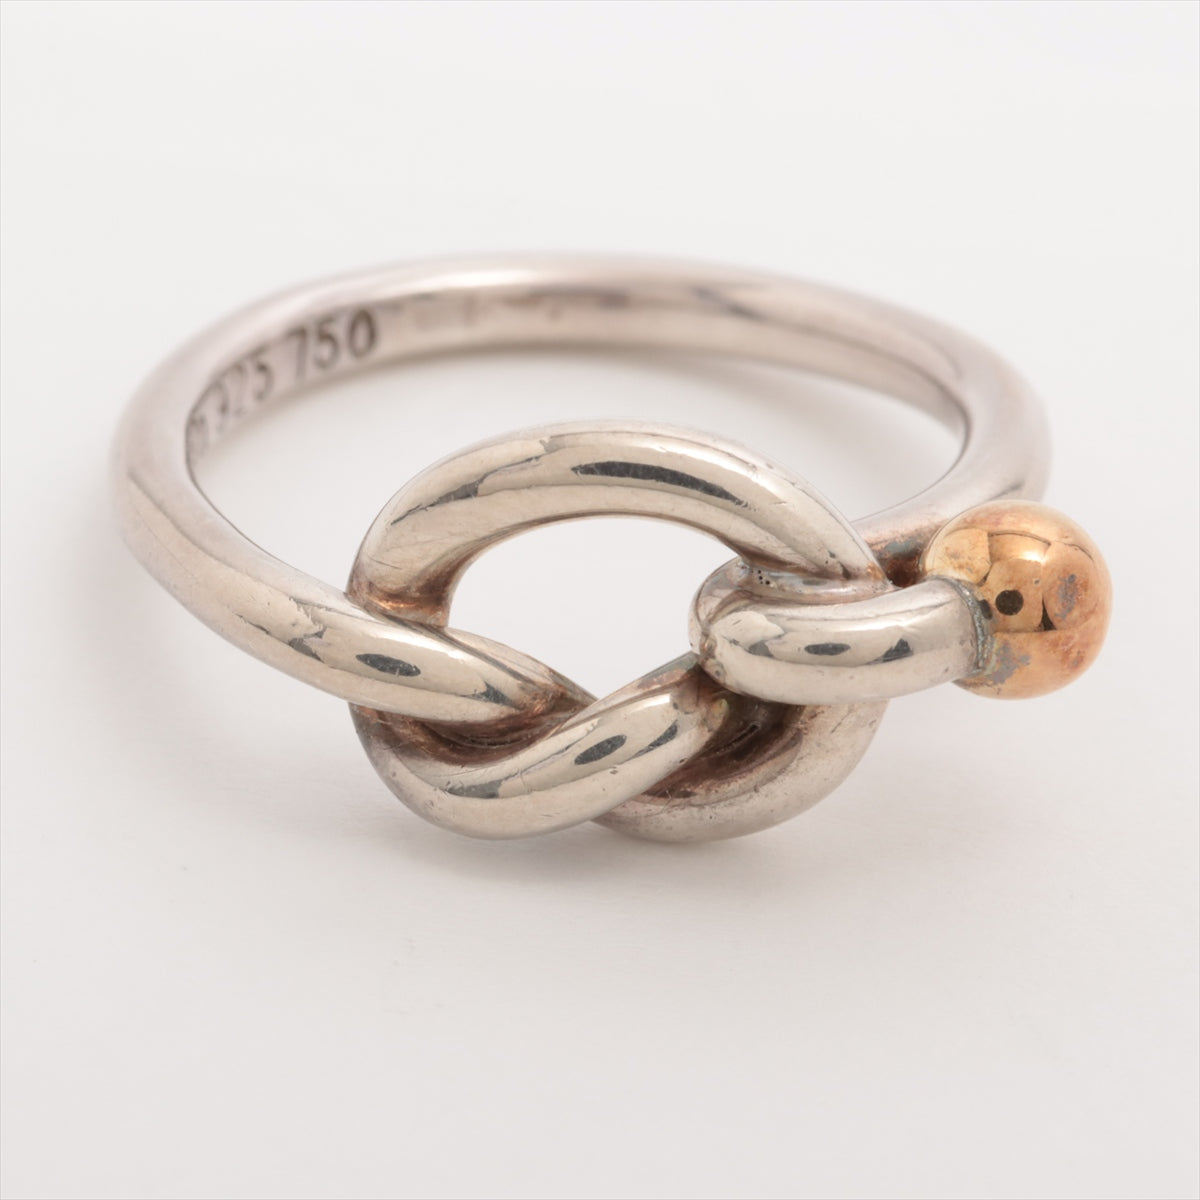 Tiffany Love Knot rings 925×750 2.8g Gold × Silver